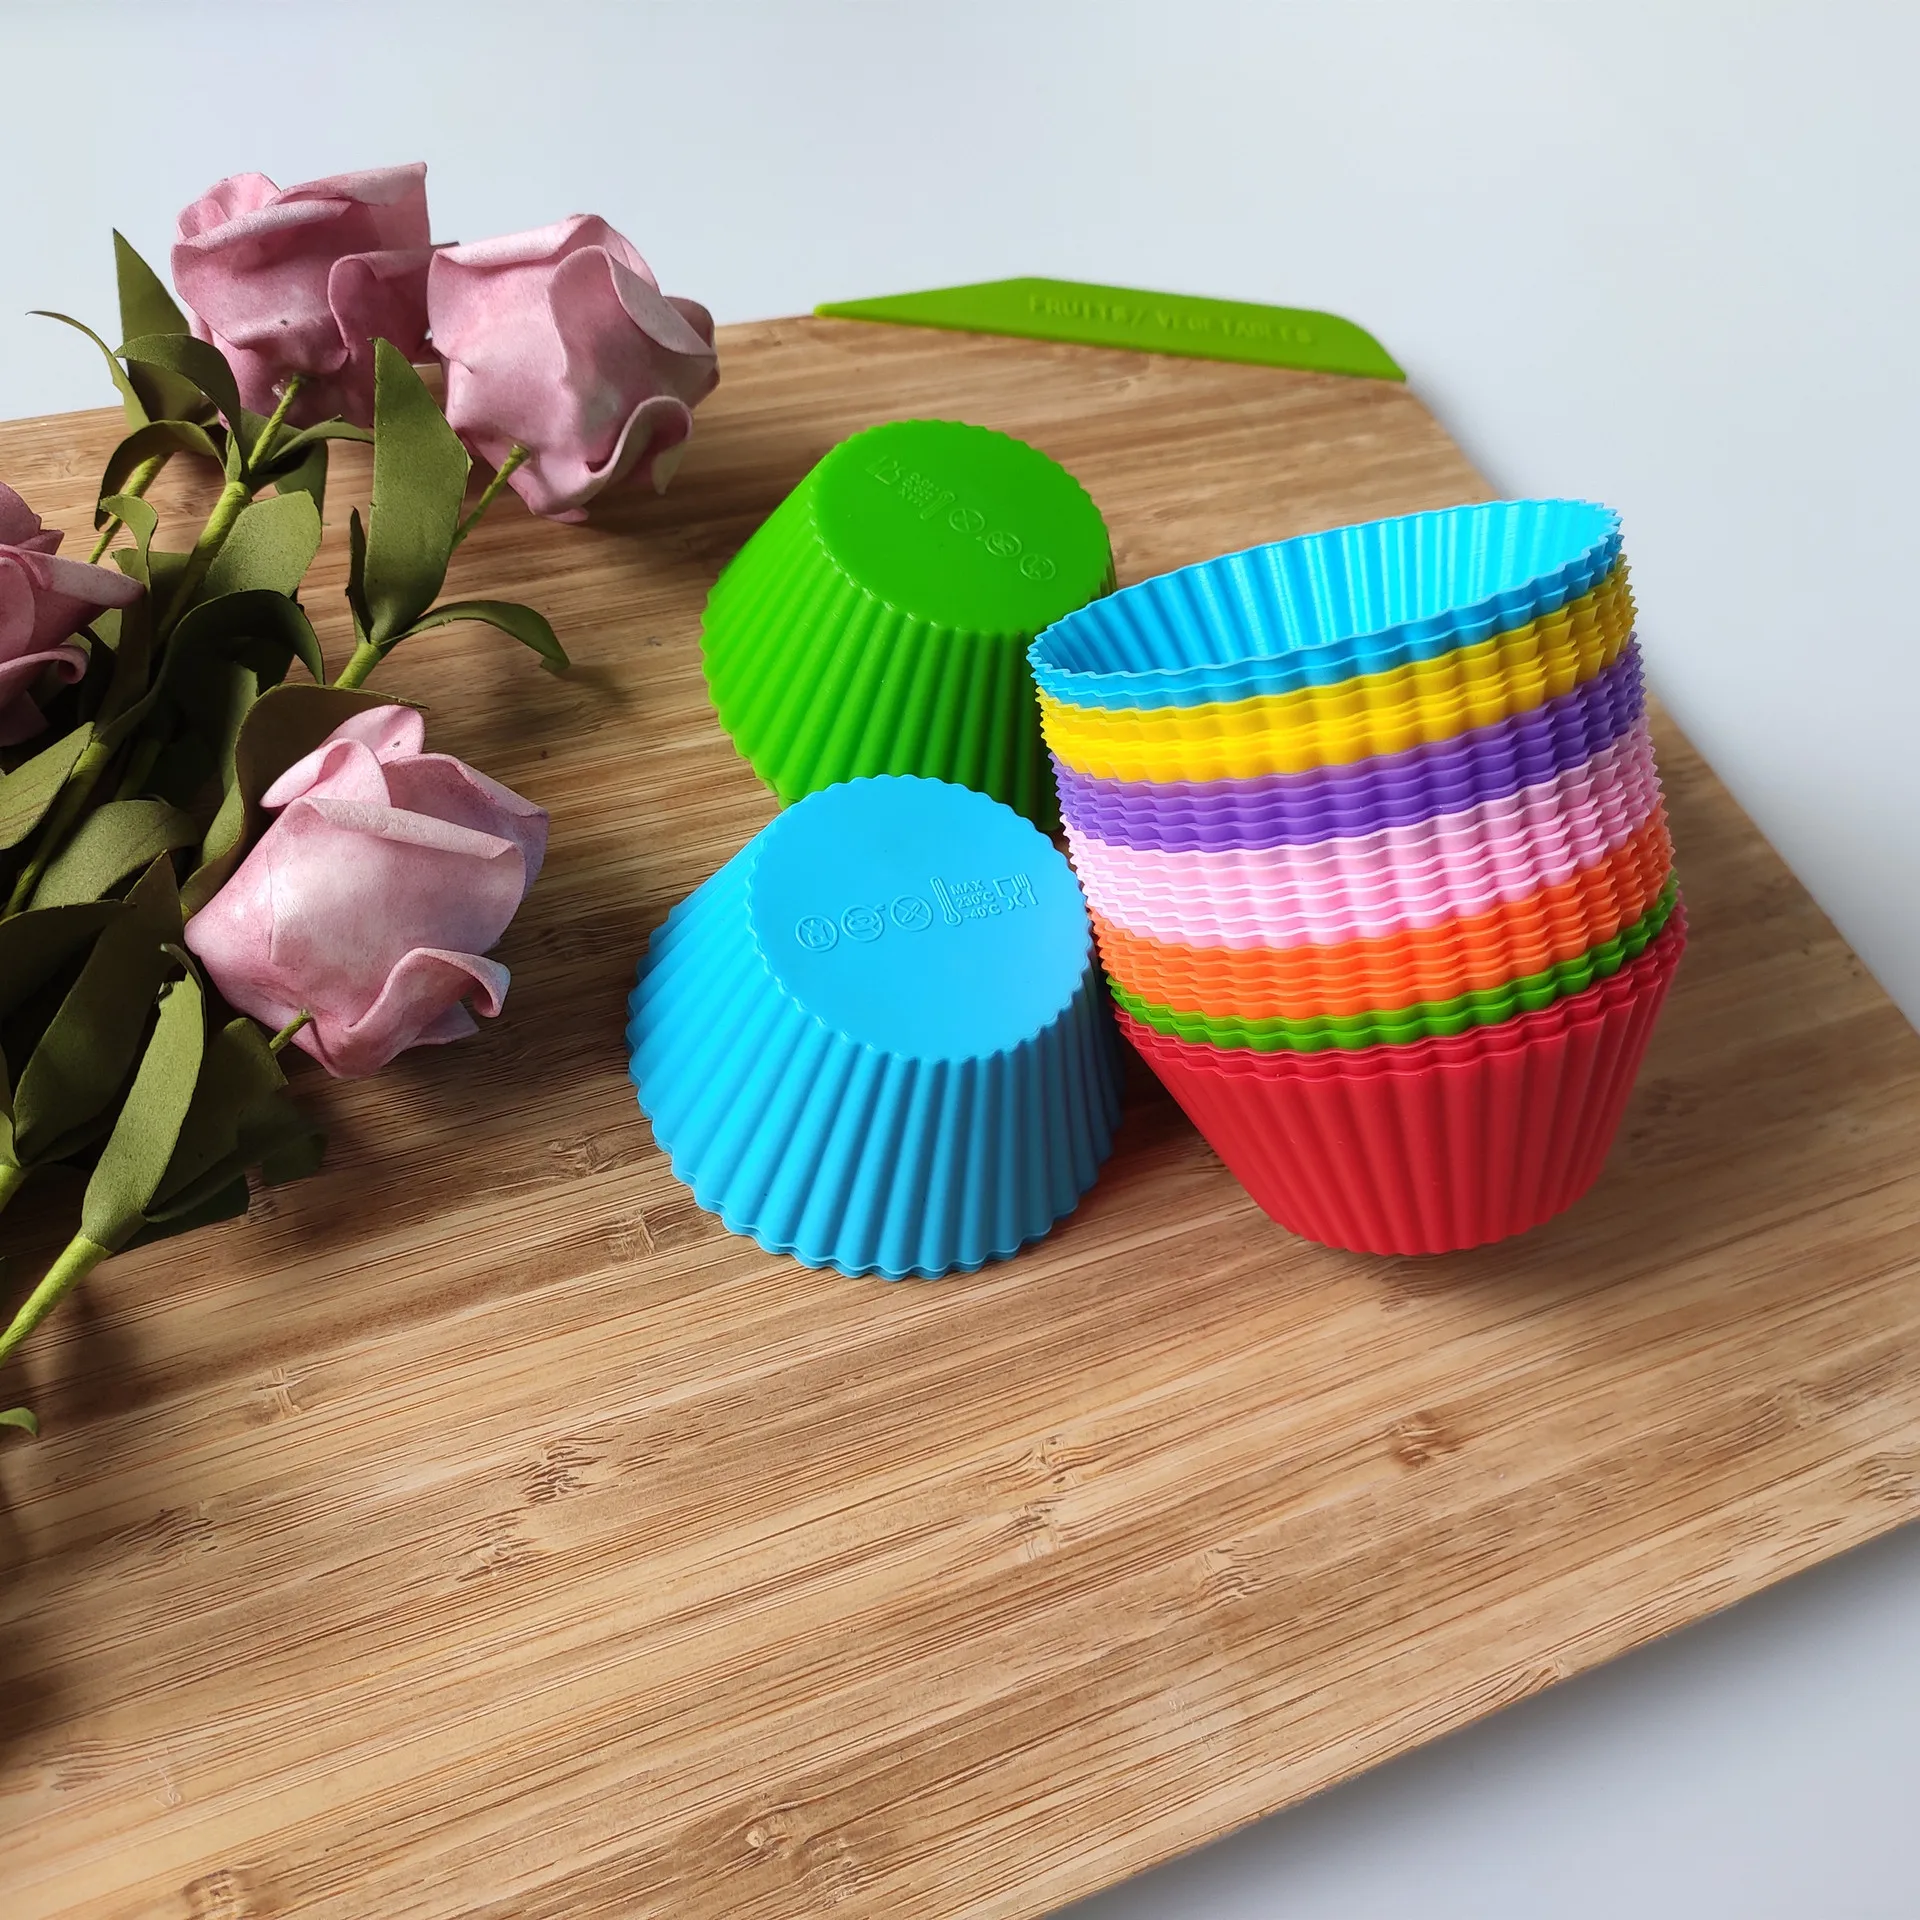 

2Pcs Silicone Cake Cup Liner Multicolor Cupcake Mold Round Muffin Pudding Egg Tart Cake Moulds Bakeware DIY Baking Pastry Tools